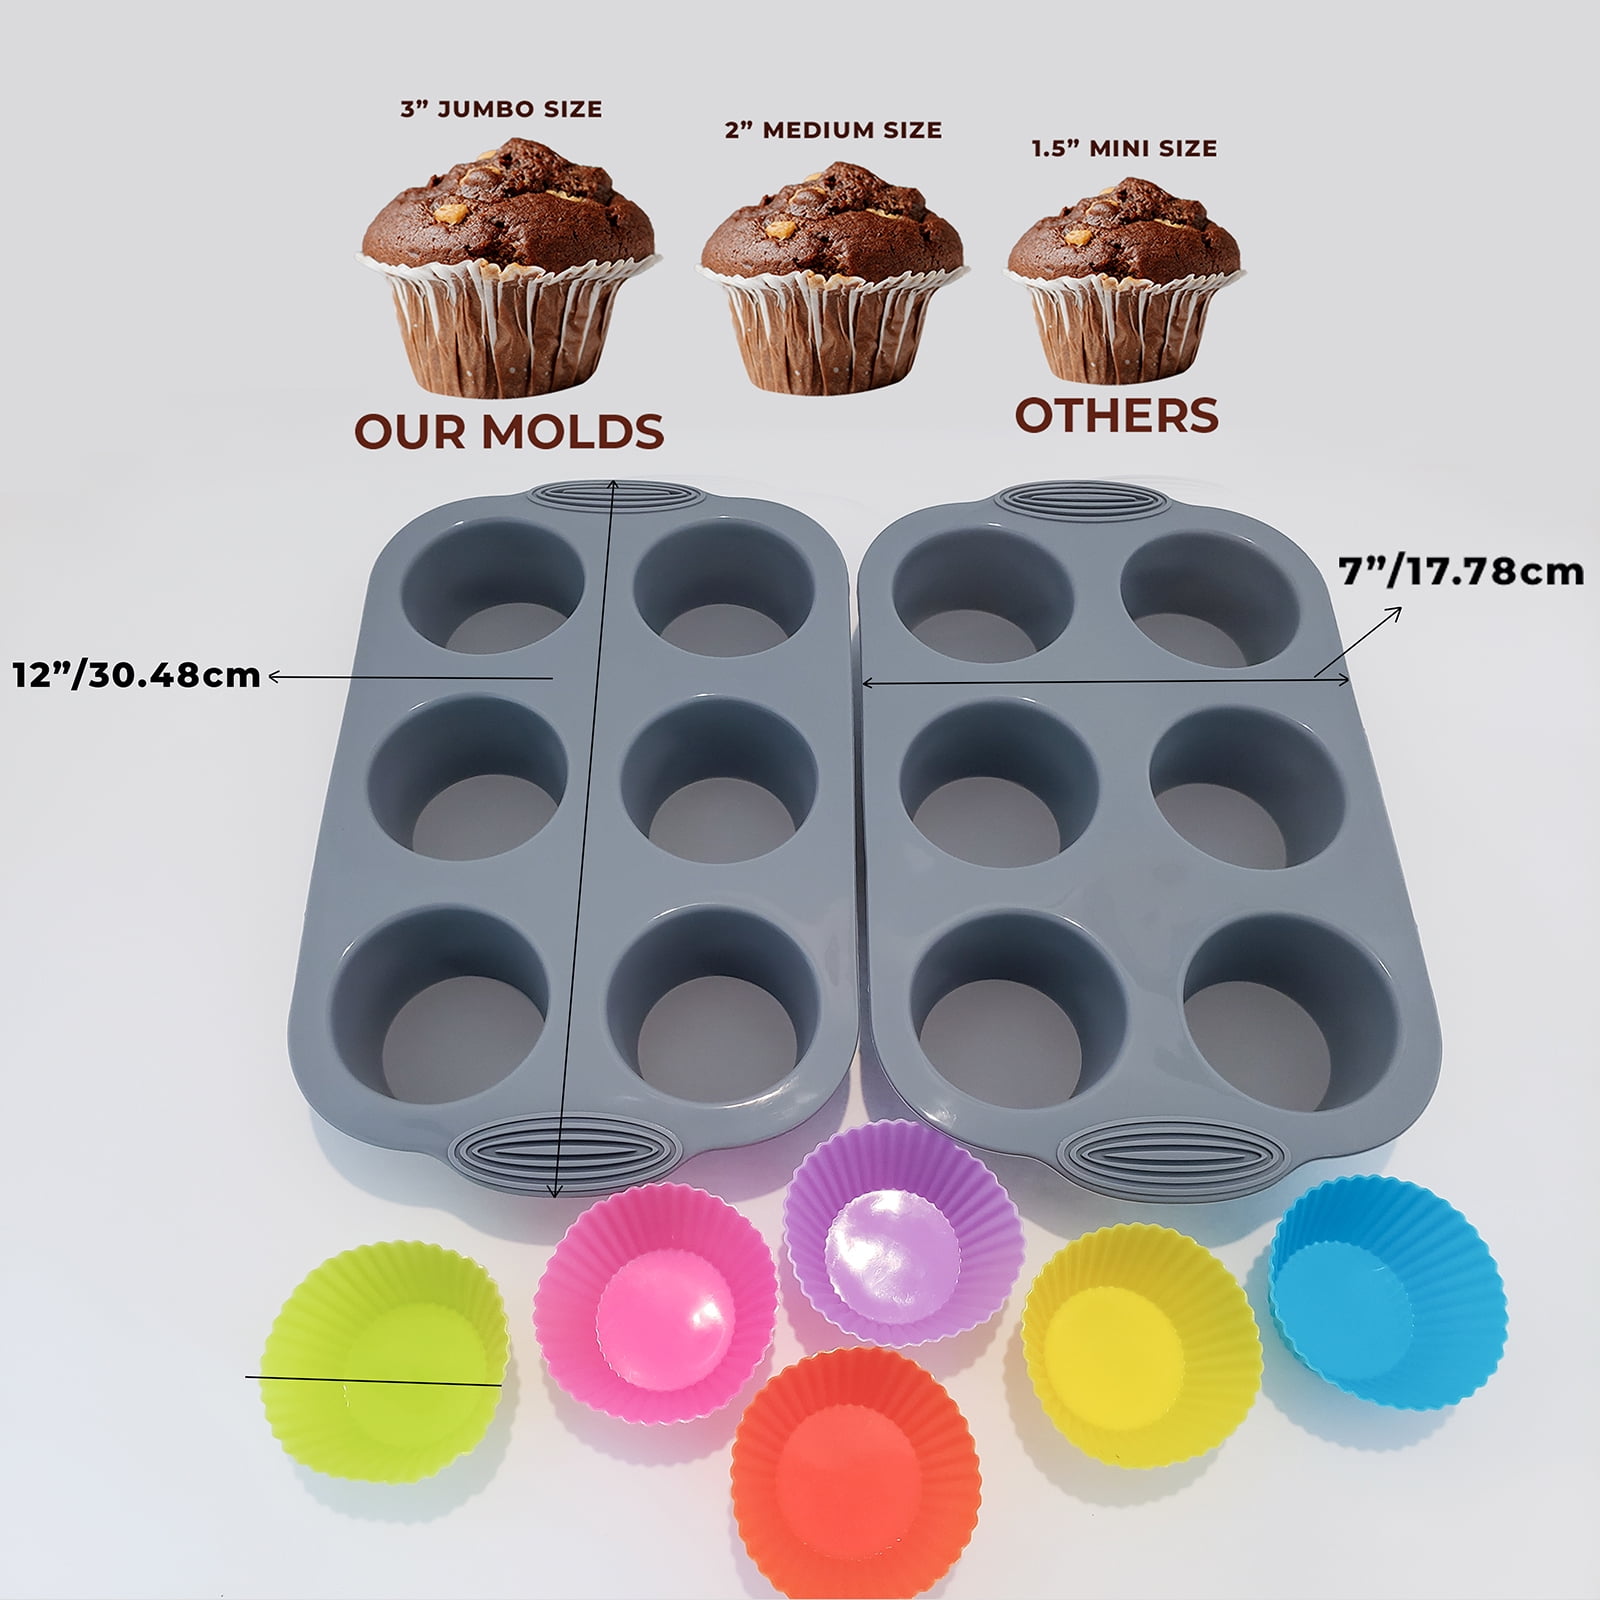 Corn Bread 12 Cavitie Details about   Premium Non-Stick Bakeware Muffin Top Baking Pan for Eggs 